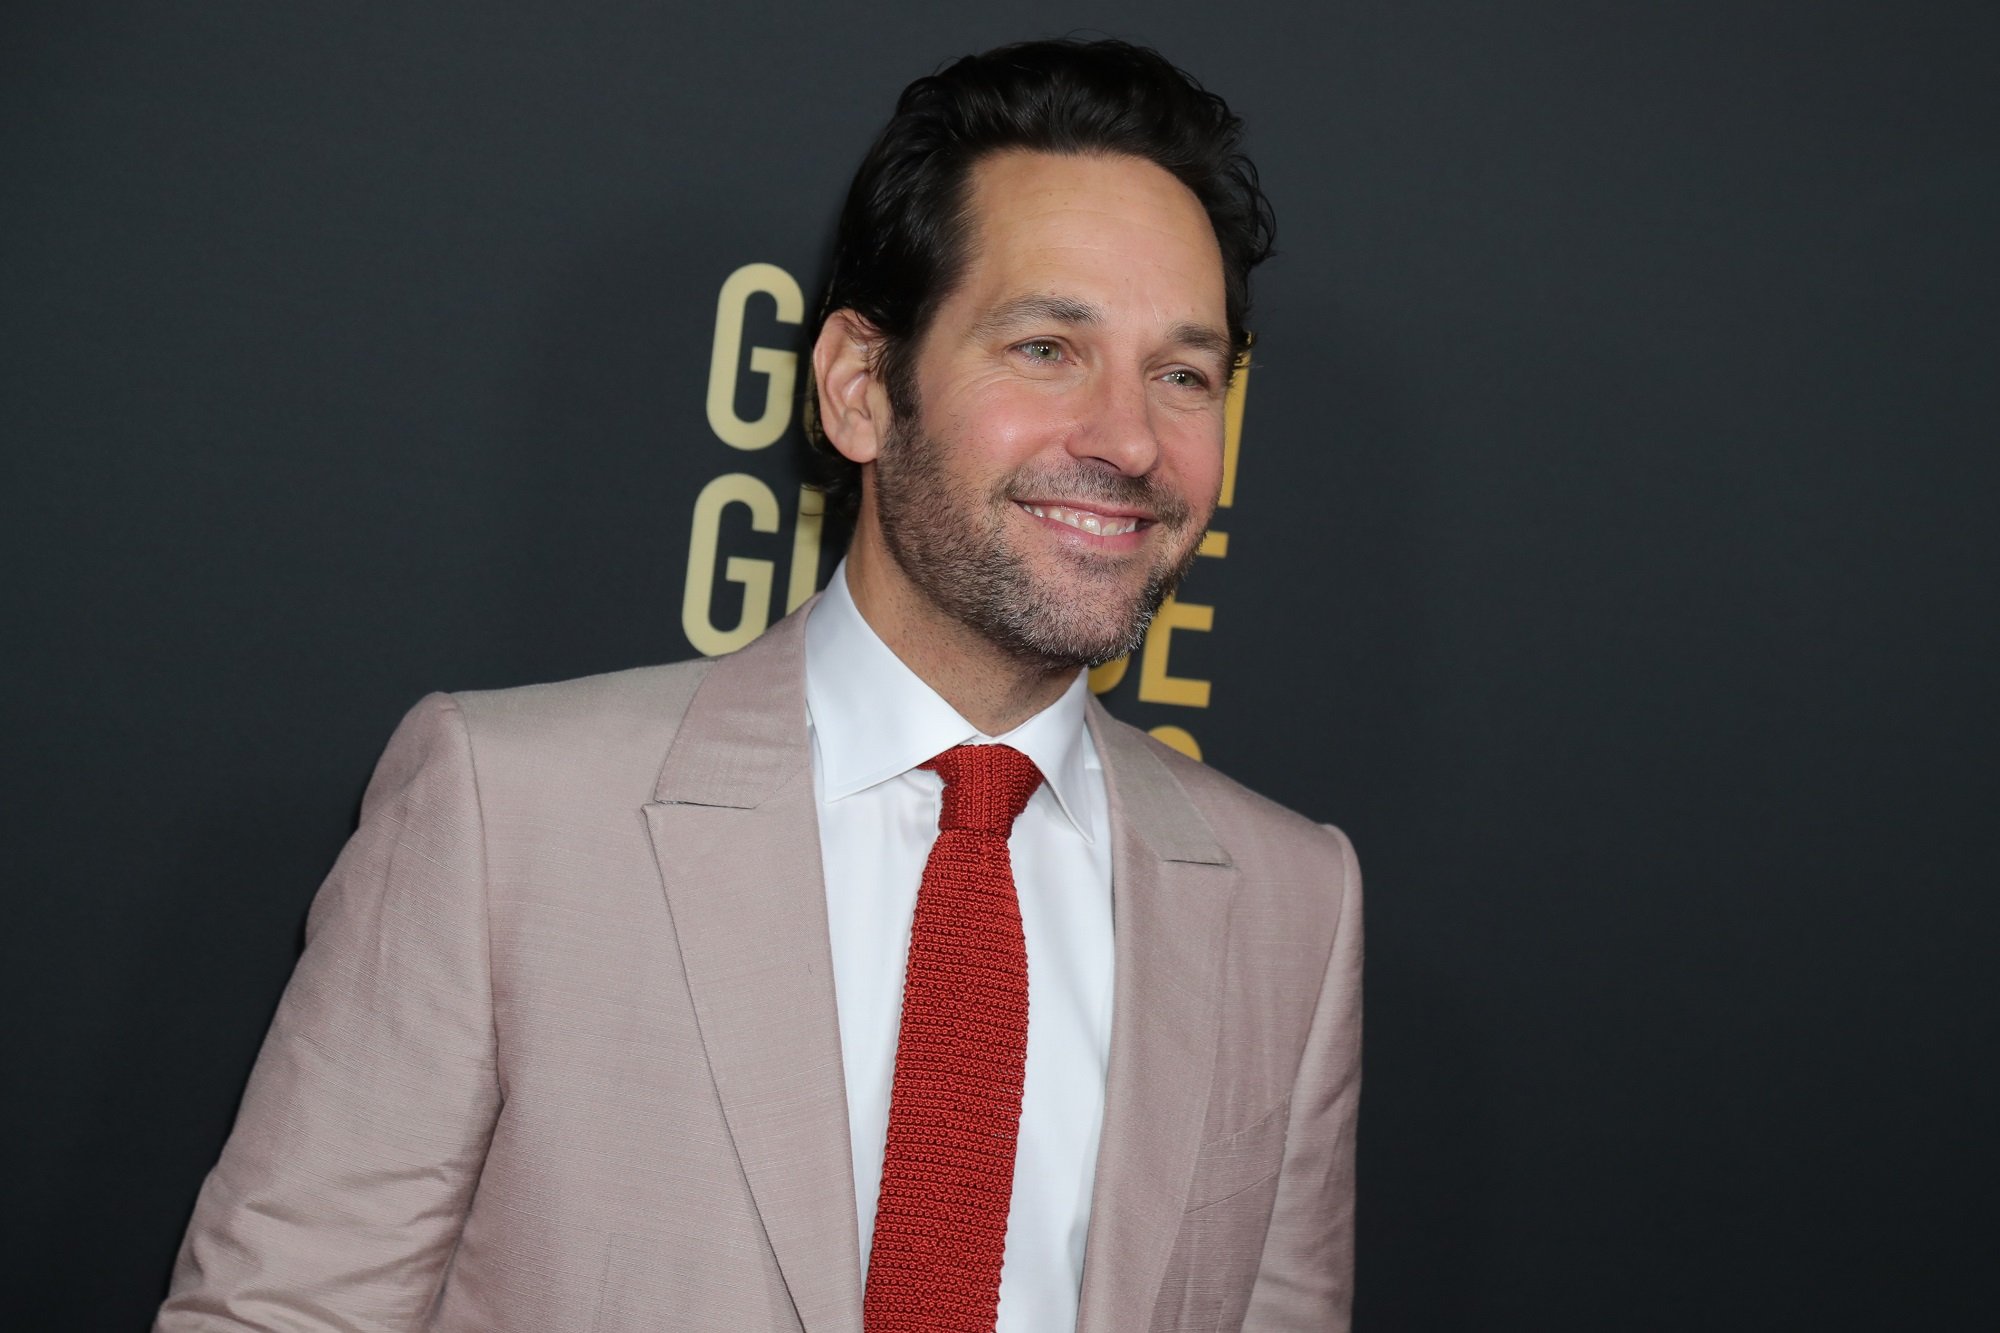 Paul Rudd attends HFPA And THR Golden Globe Ambassador Party on November 14, 2019 in West Hollywood, California.